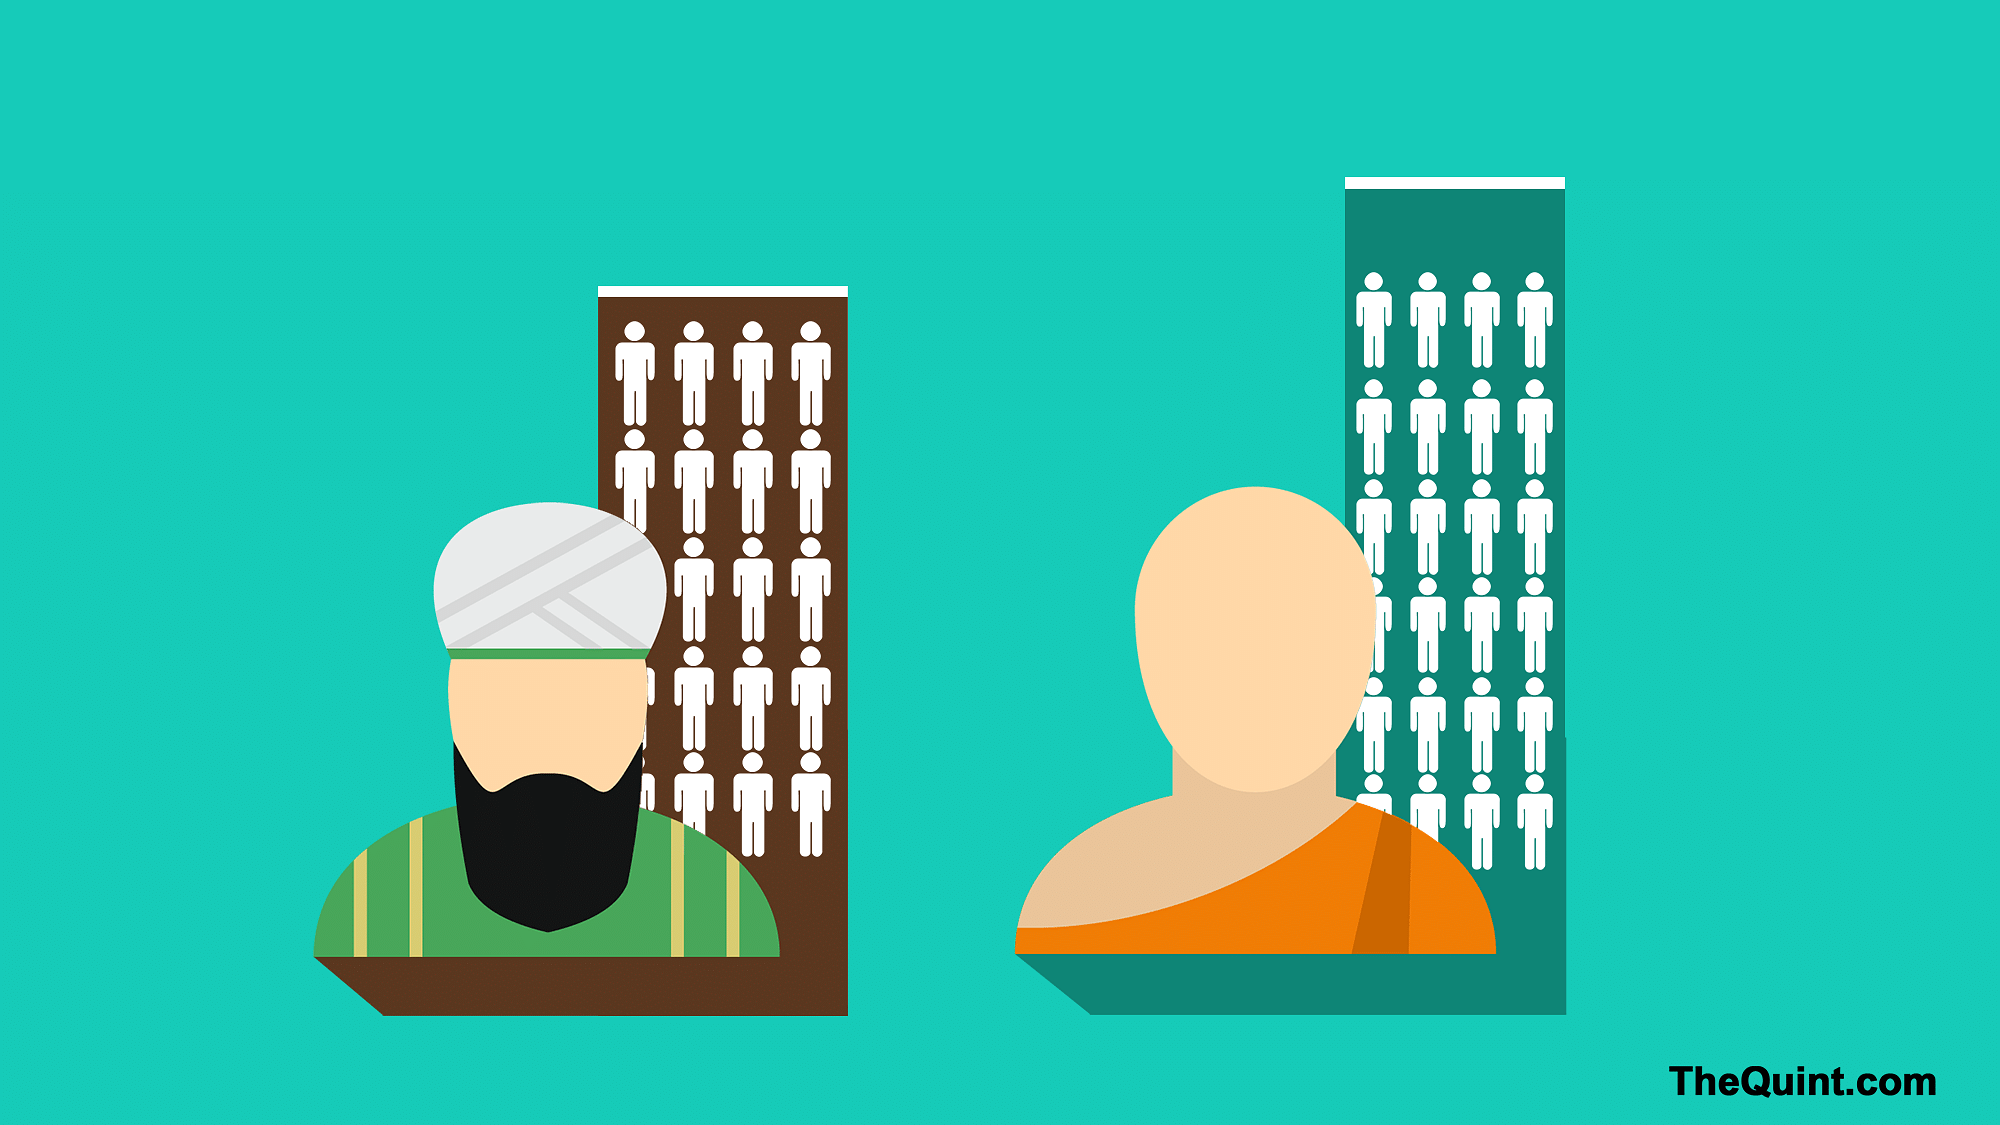 Muslim families have shrunk at a much faster rate in the last two decades. (Image: The Quint/Hardeep Singh)